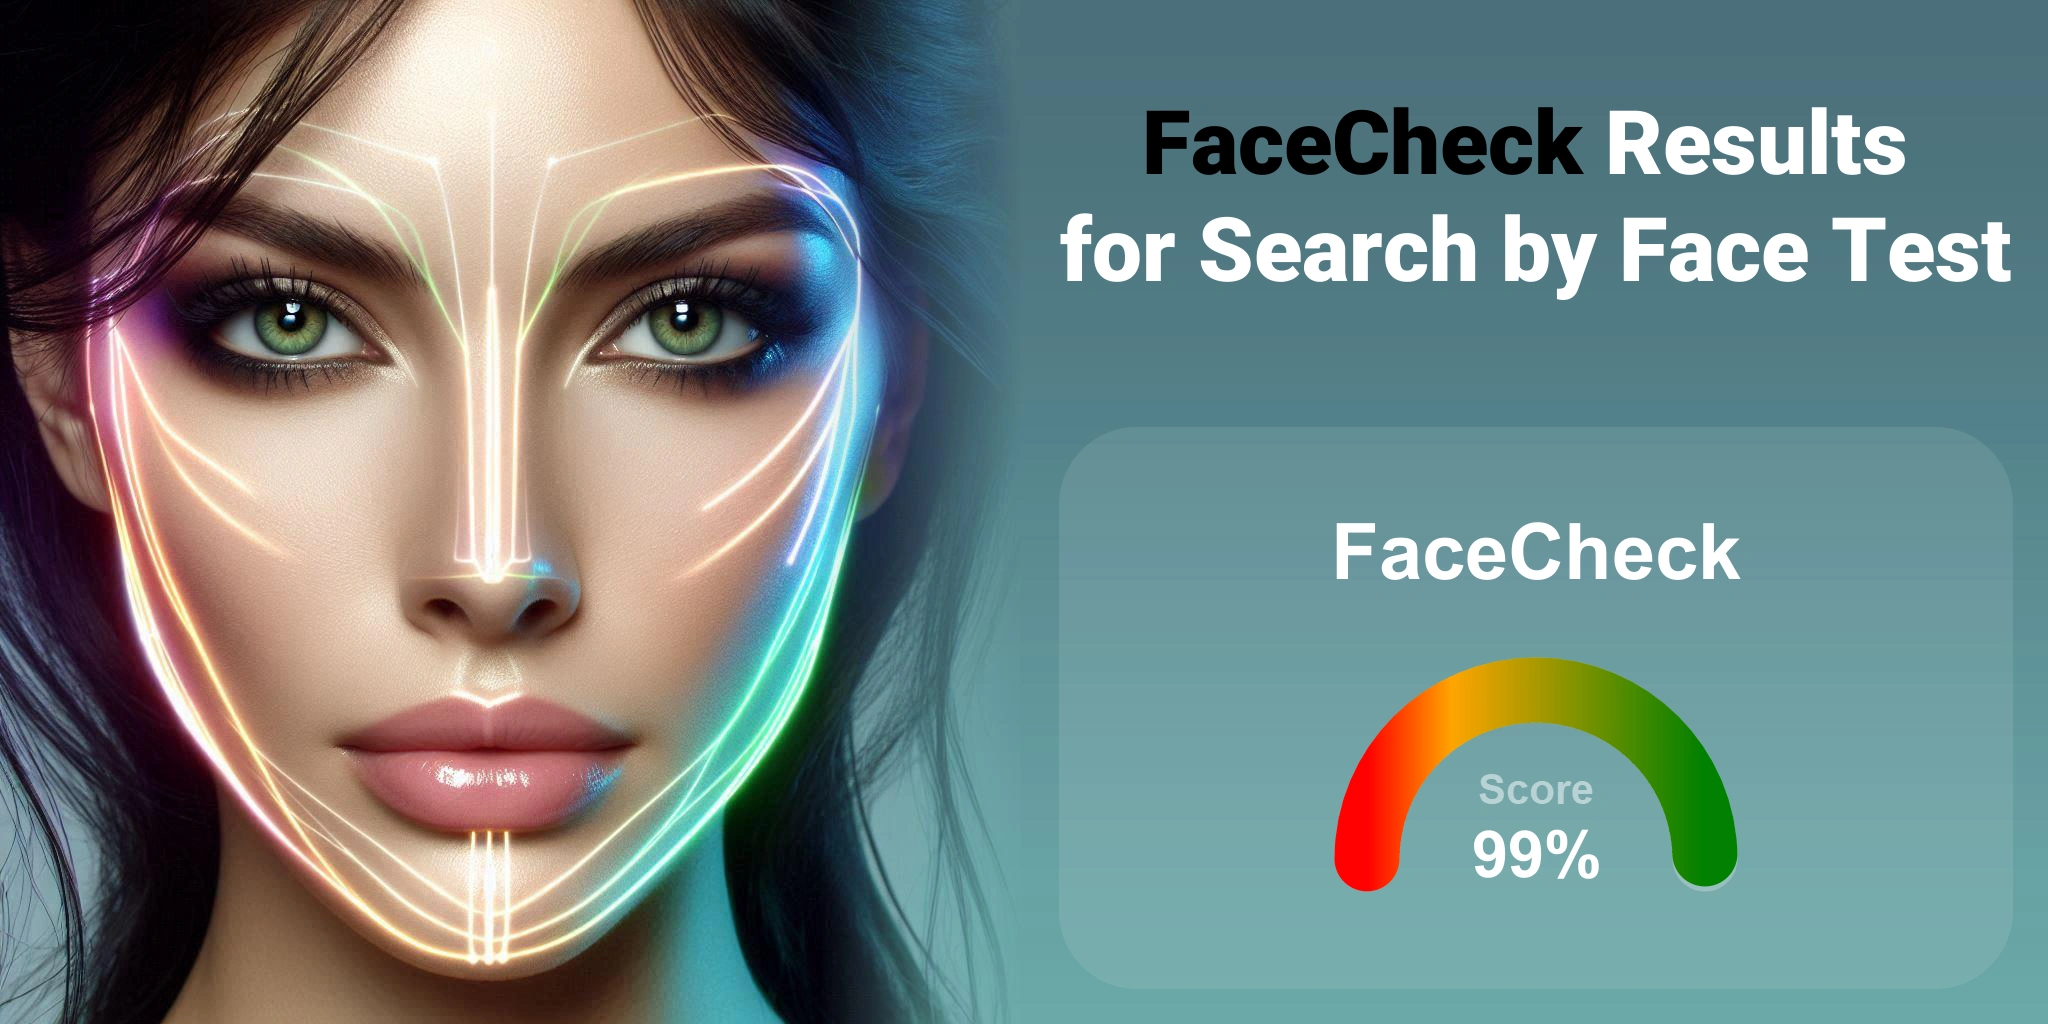 Is FaceCheck the Best for Face Search?